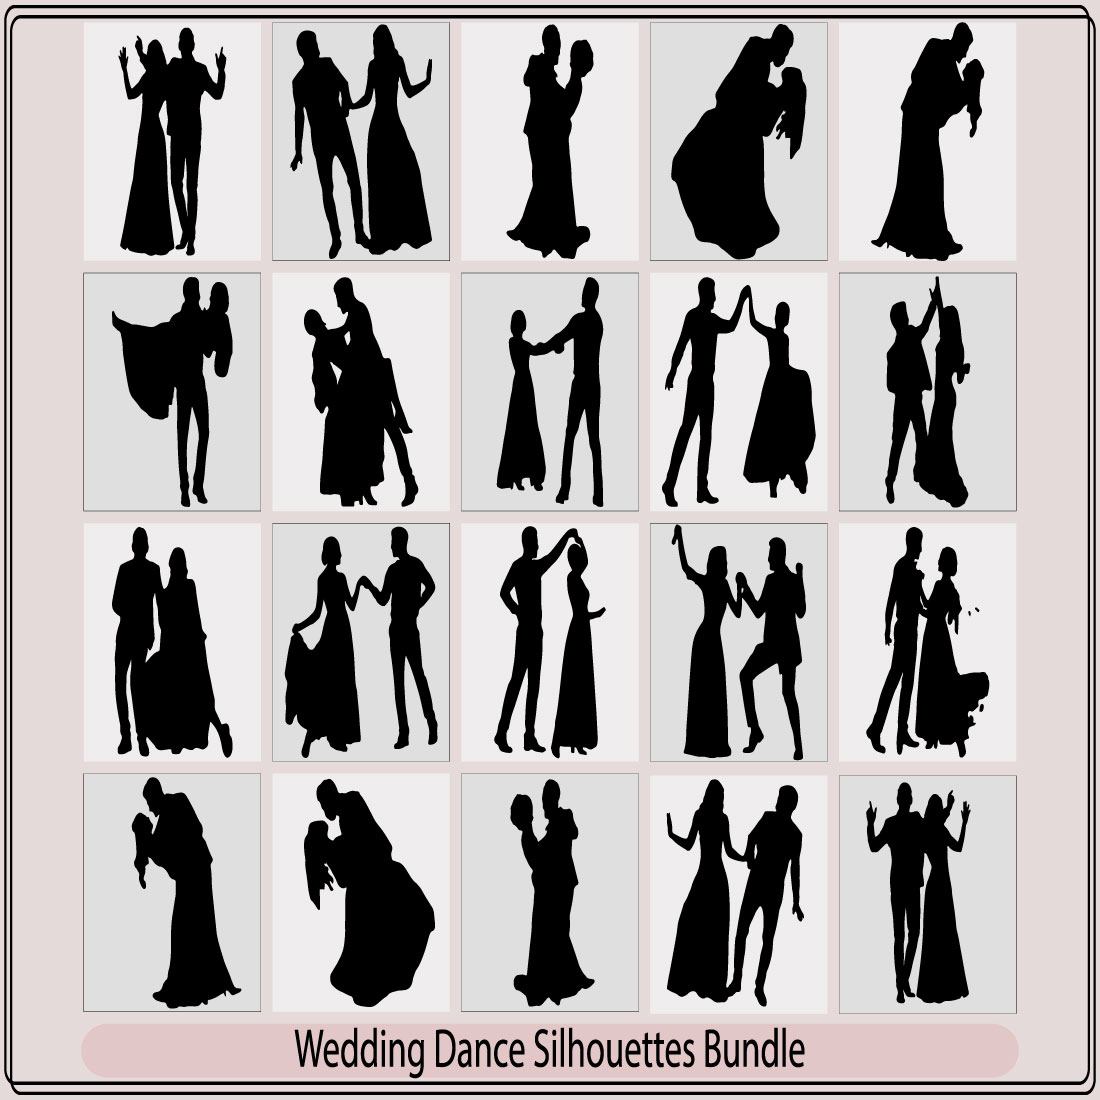 Couple Wedding dancing silhouette,Male And Female Dancing silhouettes Collection,Bride and groom in wedding silhouettes illustration preview image.